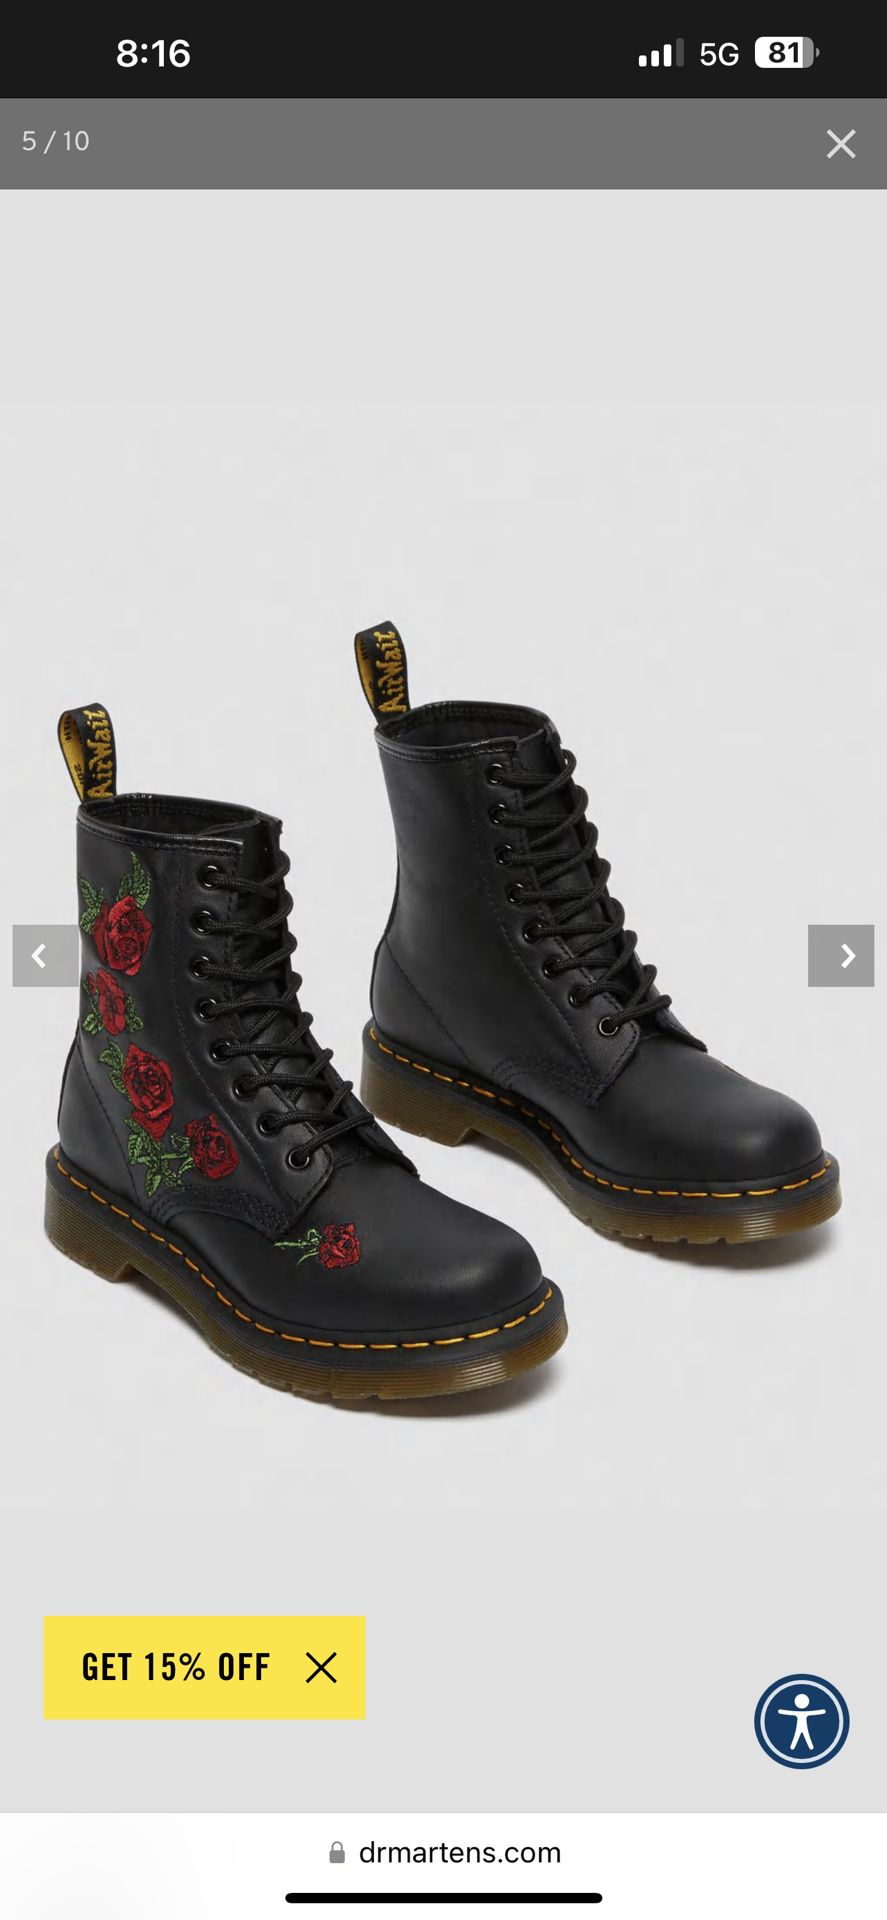 1460 VONDA FLORAL LEATHER LACE UP BOOTS for Sale in Los Angeles, CA ...